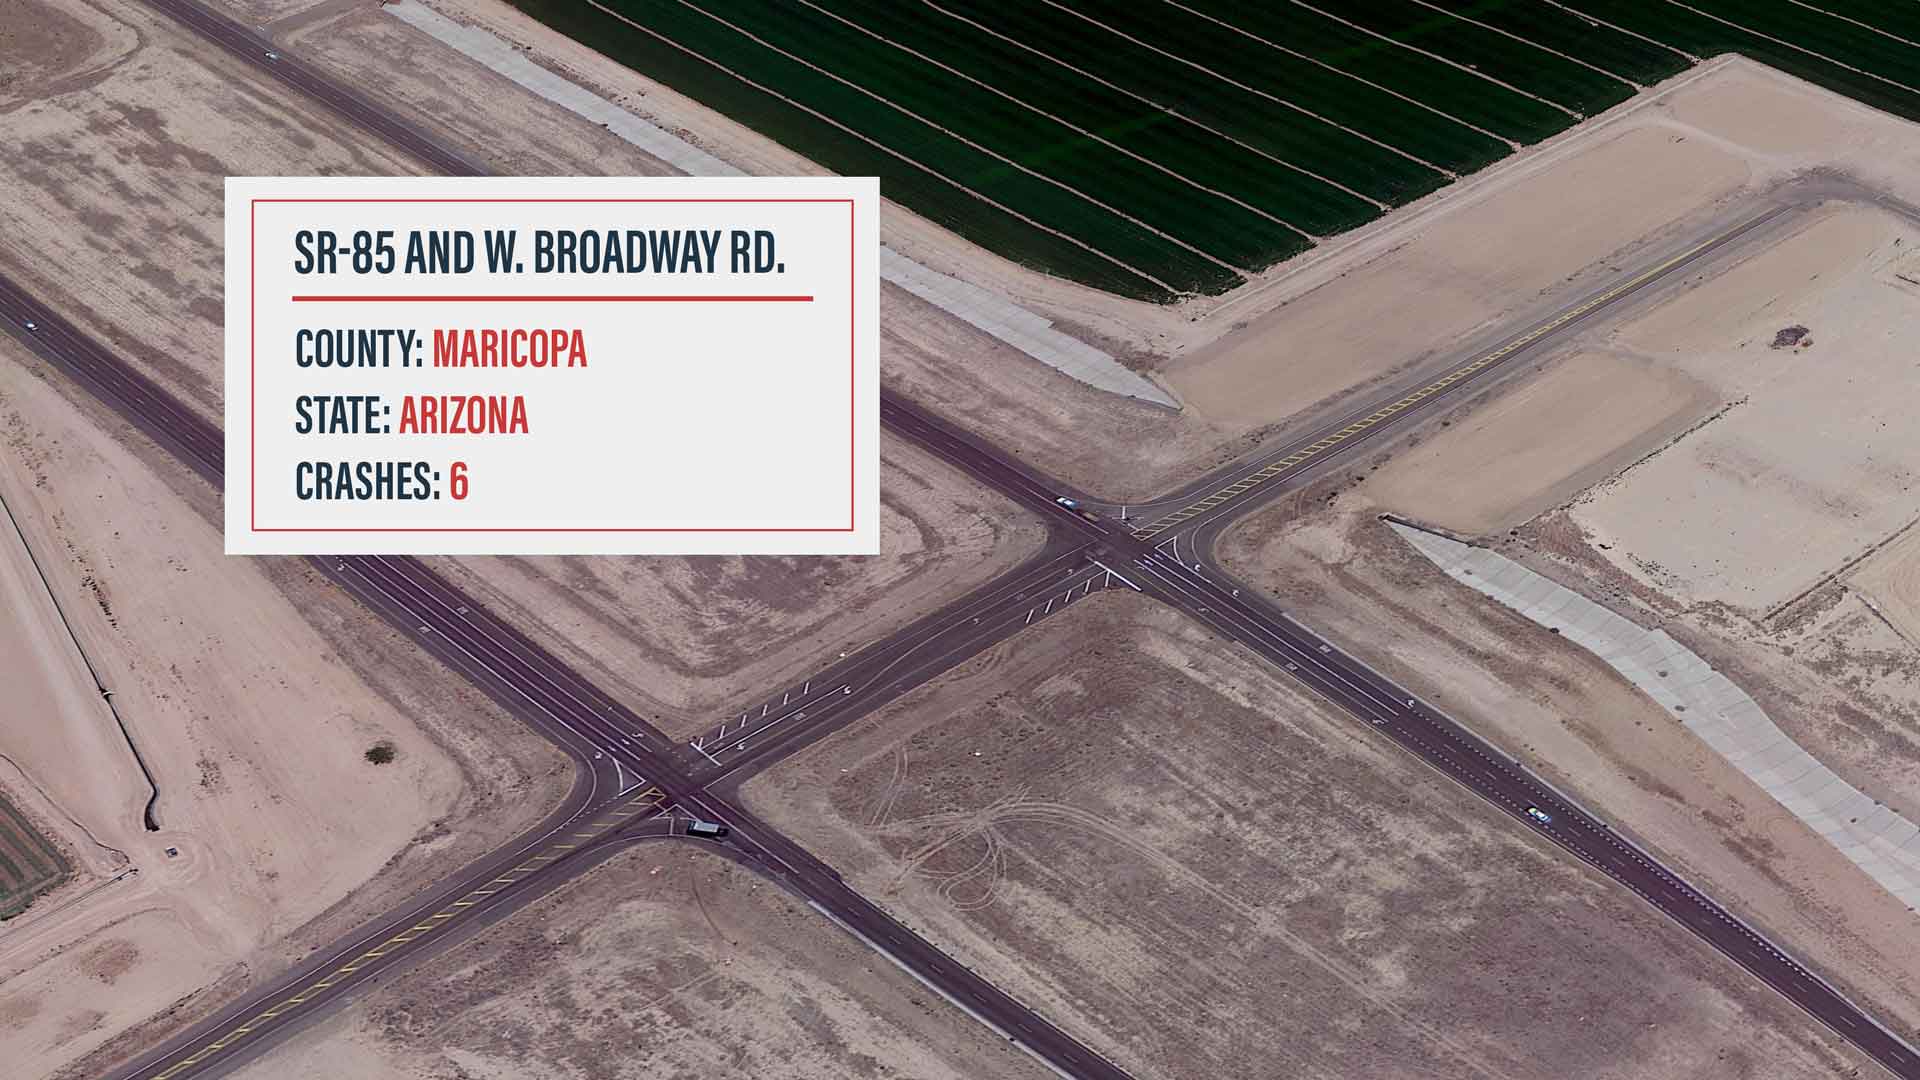 Aerial view of S. Oglesby Rd./Phoenix Bypass Rte. (SR-85) AND W. Broadway Rd.